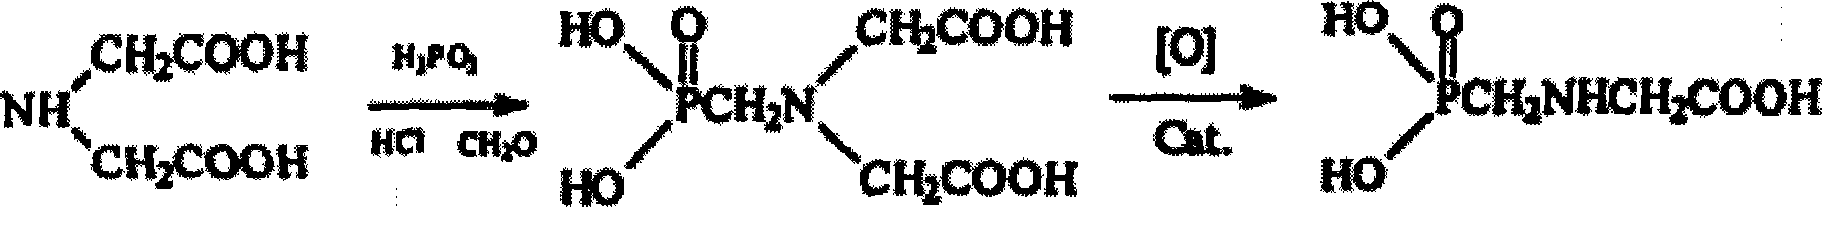 Method for preparing glyphosate by oxidizing N-(Phosphonomethyl)iminodiacetic acid with active carbon as catalyst oxygen